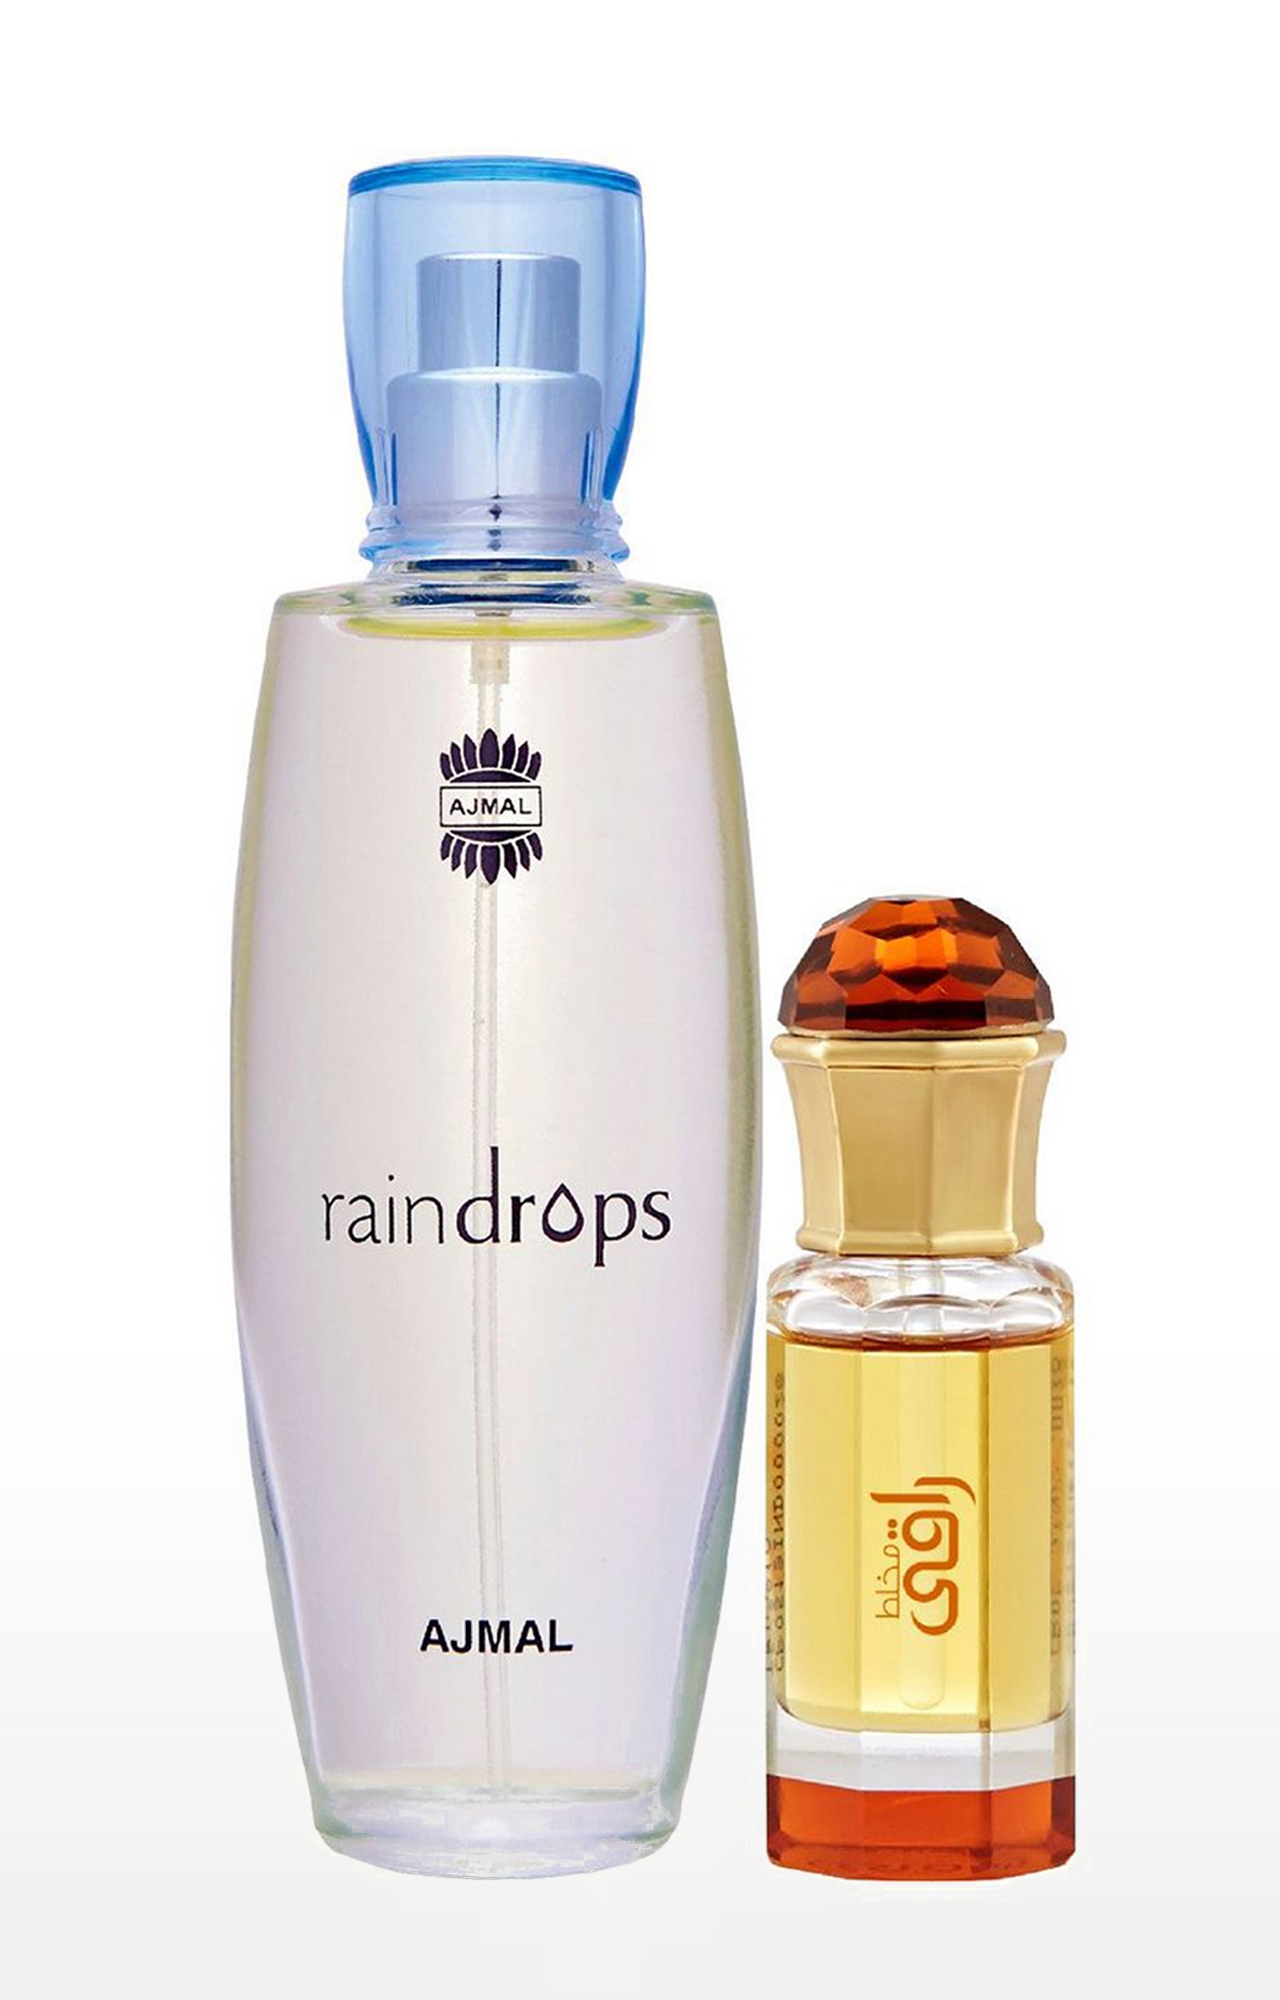 Ajmal Raindrops EDP Perfume 50ml for Women and Mukhallat Raaqi Concentrated Perfume Oil Fruity Alcohol-free Attar 10ml for Unisex